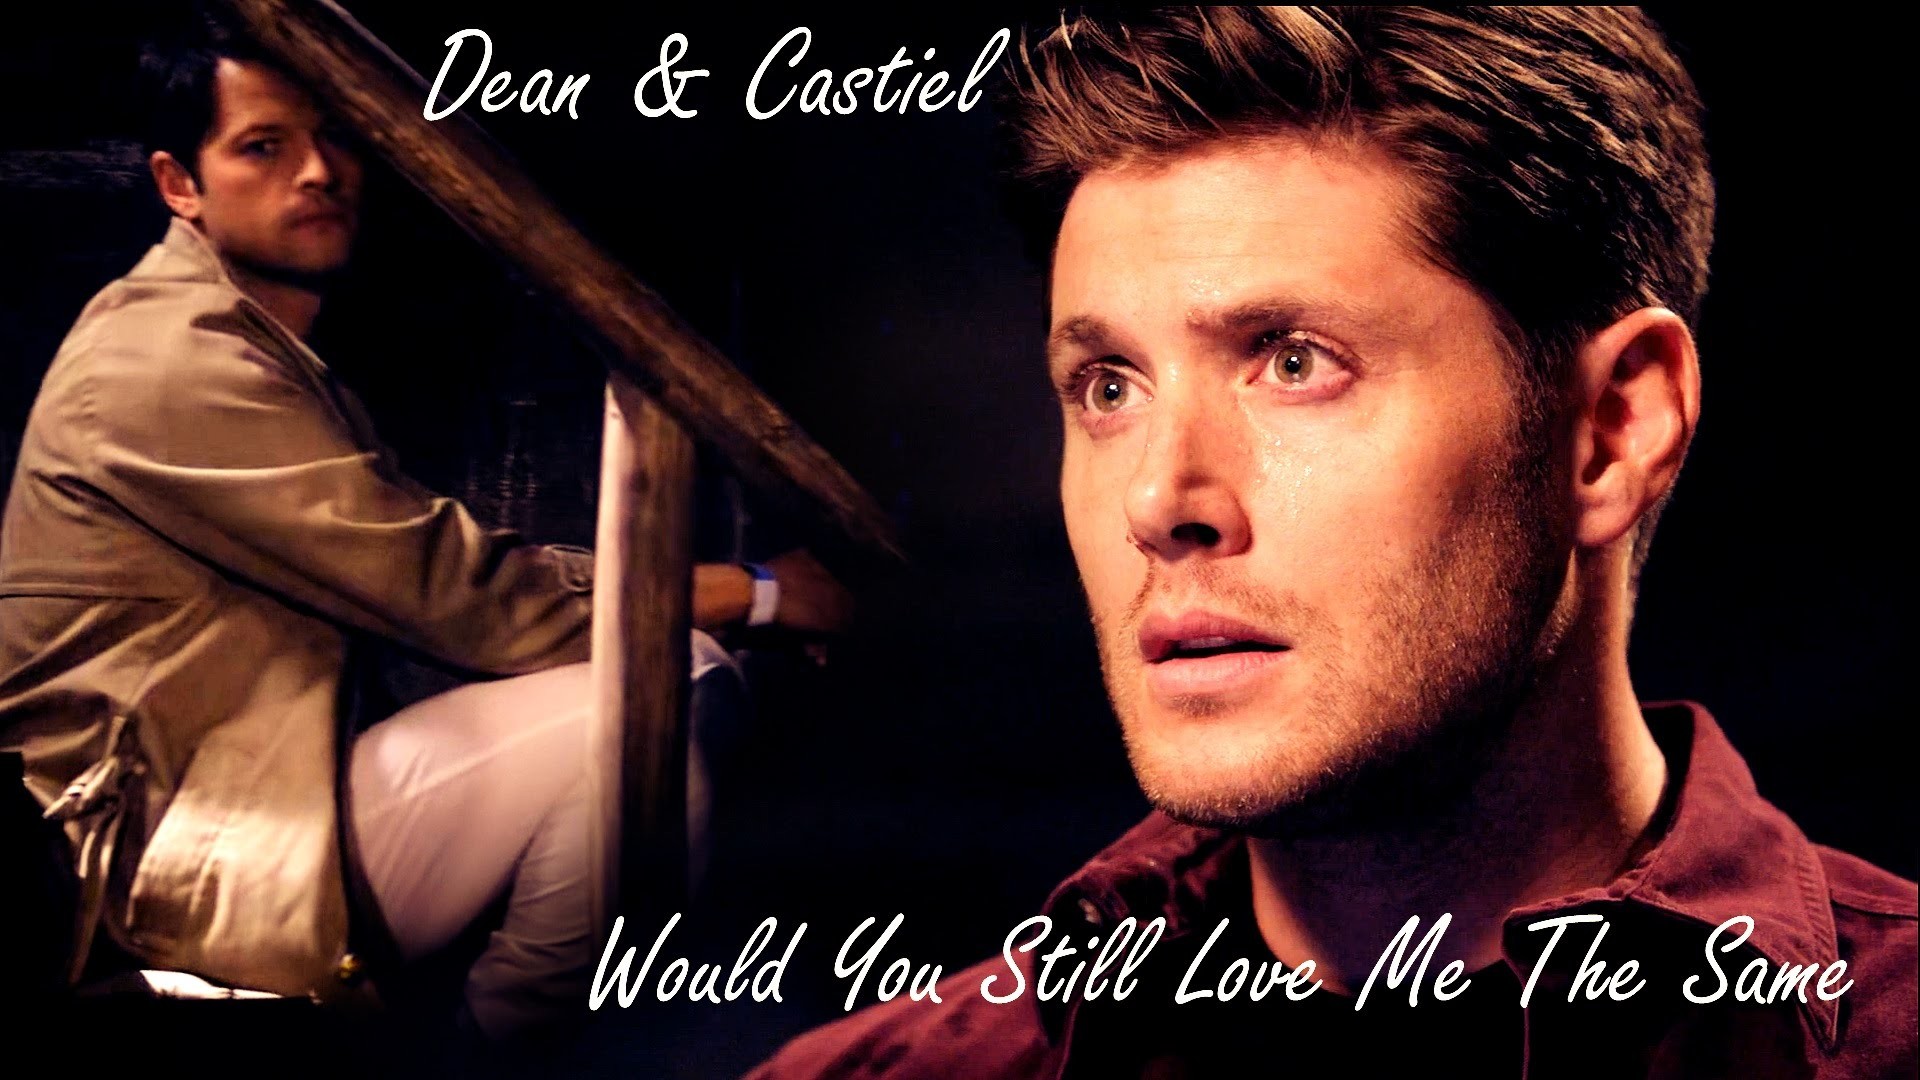 1920x1080 Dean & Castiel - Would You Still Love me the same (Song/Video request) -  YouTube